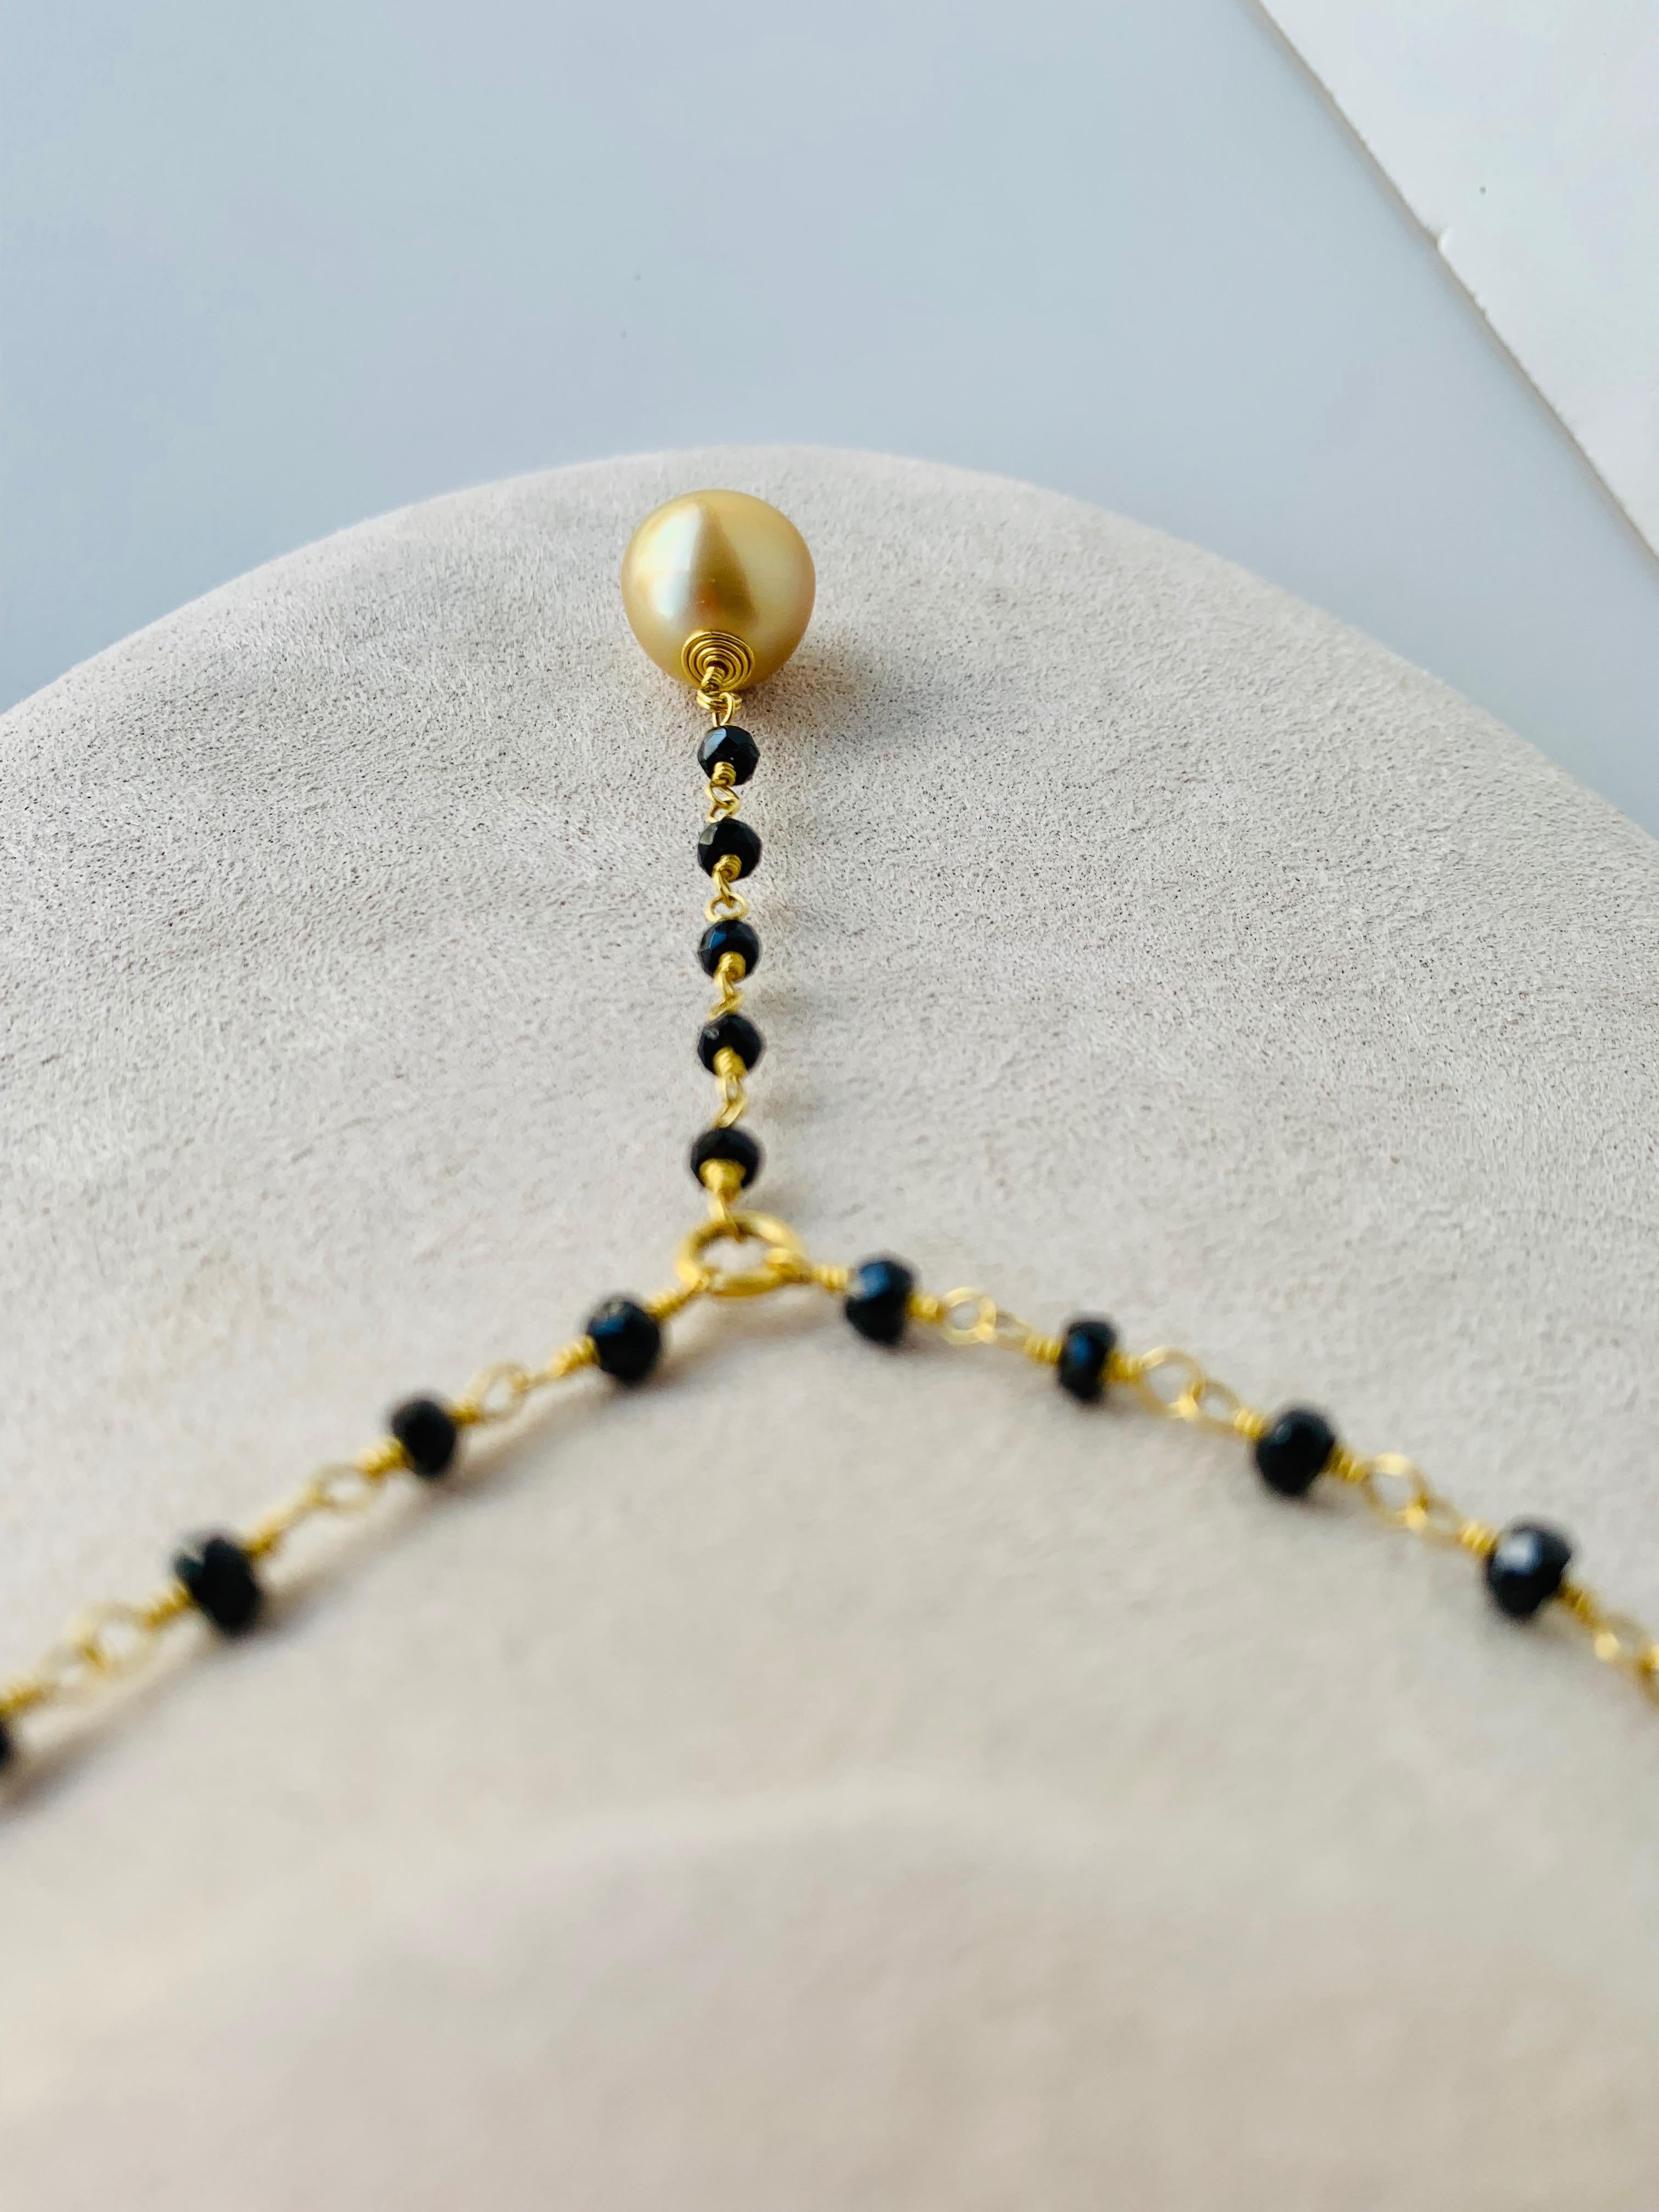 Artisan South Sea Golden Pearl and Black Spinel Necklace 22 Karat Gold